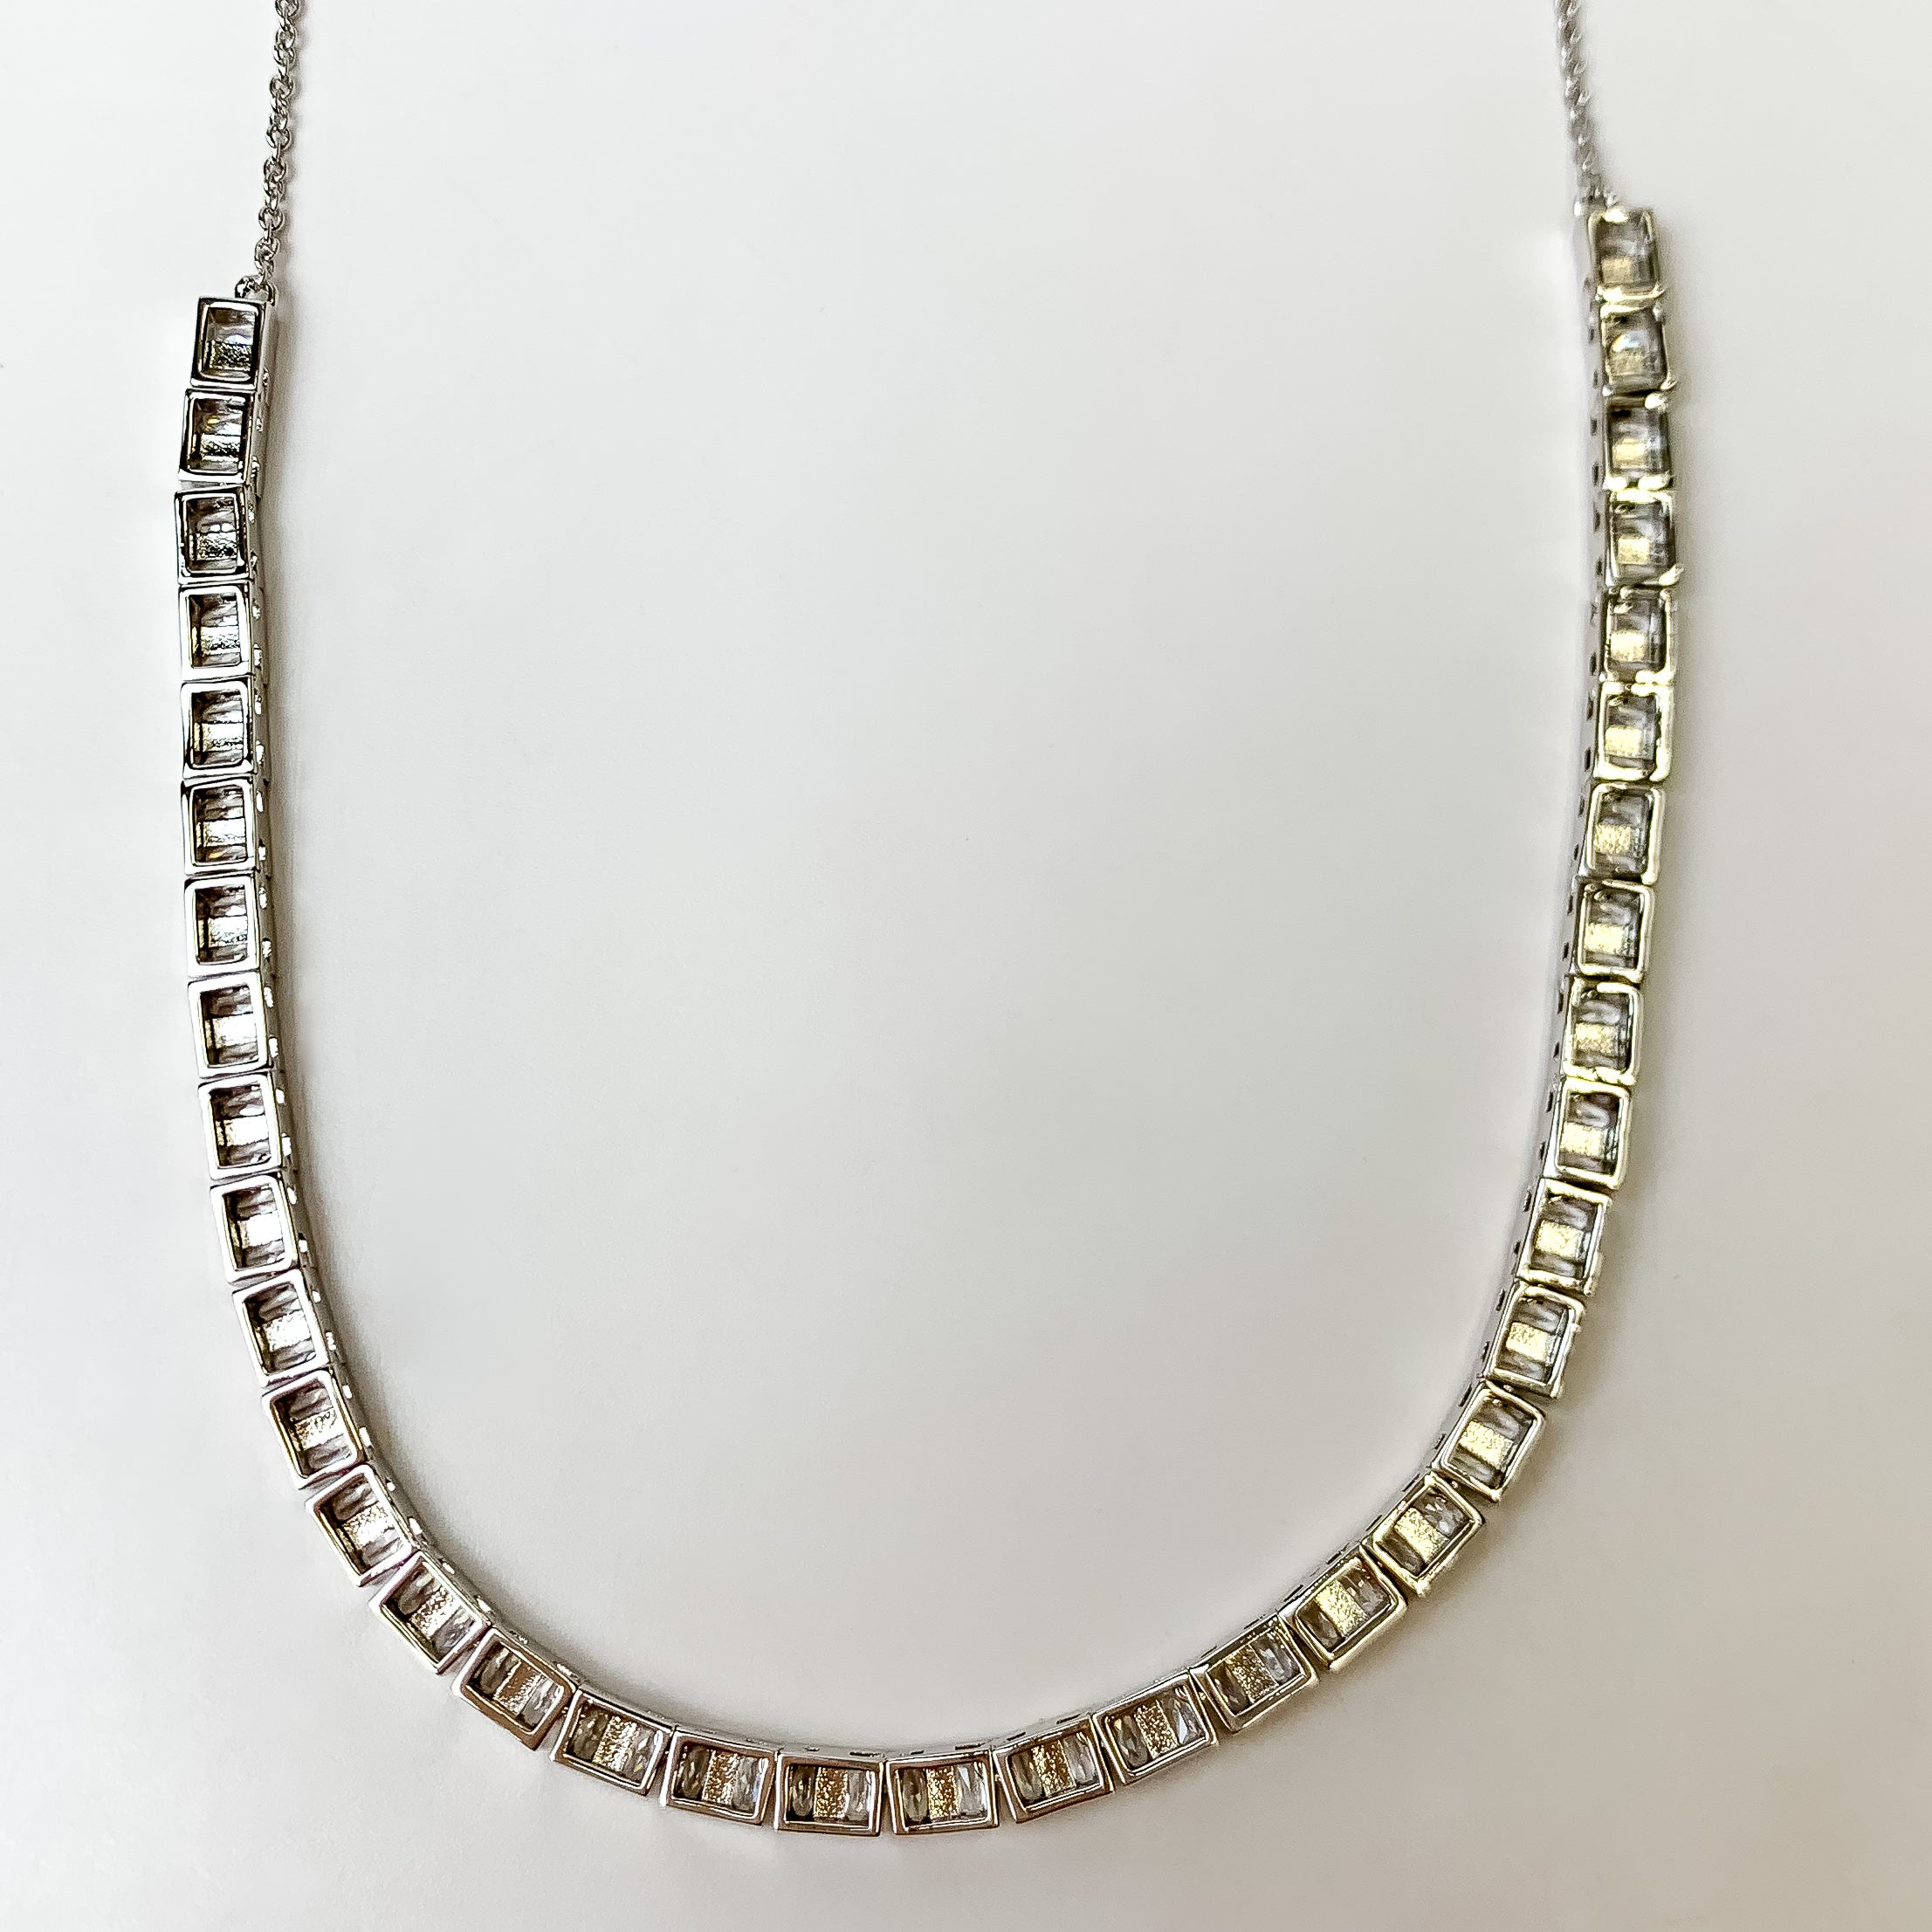 This Gracie Silver Tennis Necklace in White CZ by Kendra Scott is Pictured on a white background.